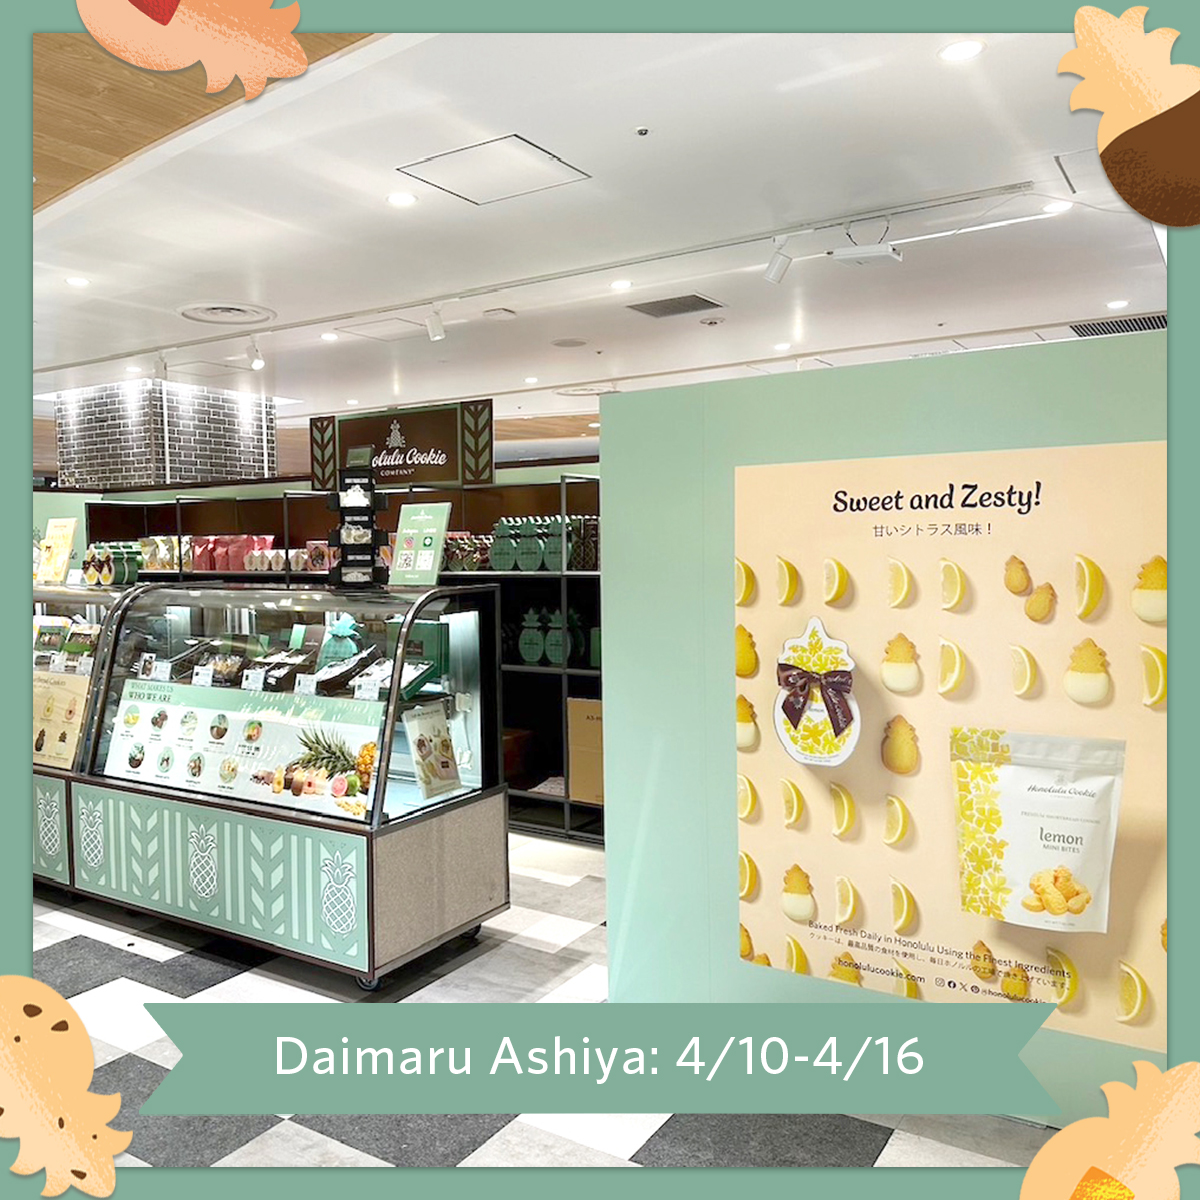 Treat yourself to a taste of Hawaii at our latest Japan pop-up shop happening now! We’re at Daimaru Ashiya now until April 16th, located at the 3rd floor event space. Don’t miss out on the sweet fun—see you there!